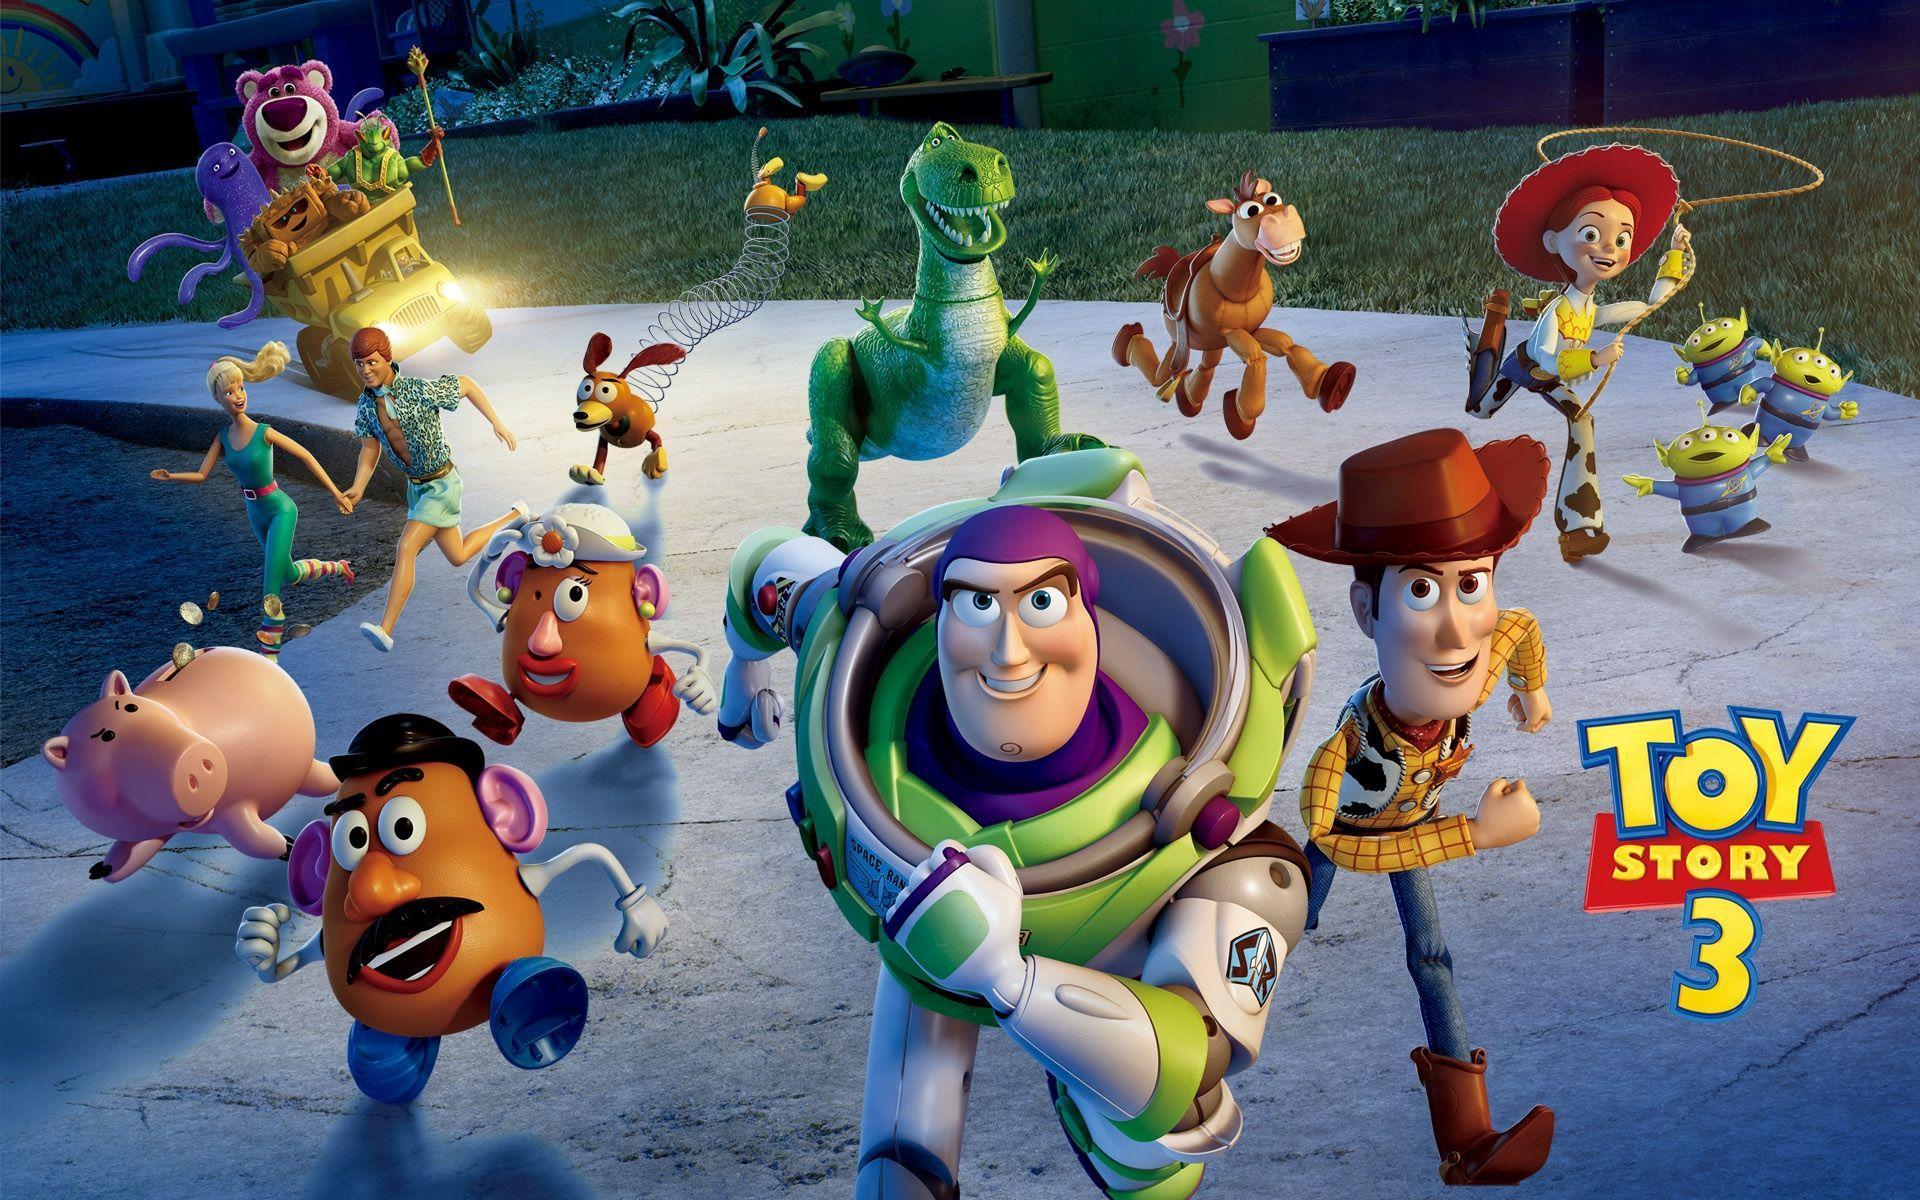 HD Quality Toy Story Image, Toy Story Wallpaper HD Base